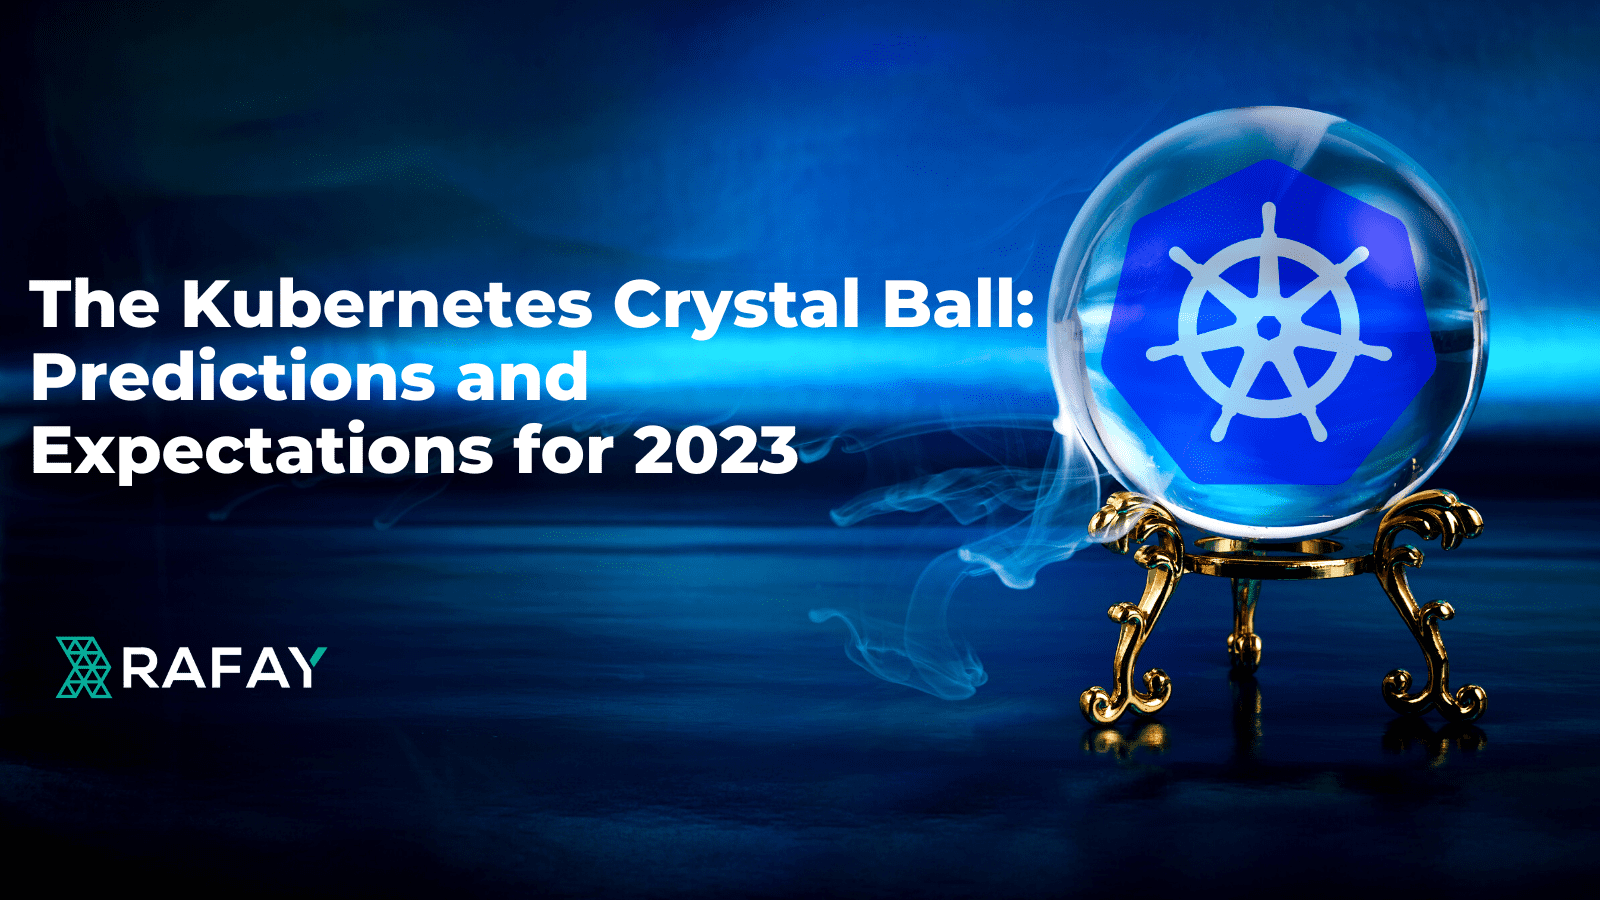 Image for The Kubernetes Crystal Ball: Predictions and Expectations for 2023